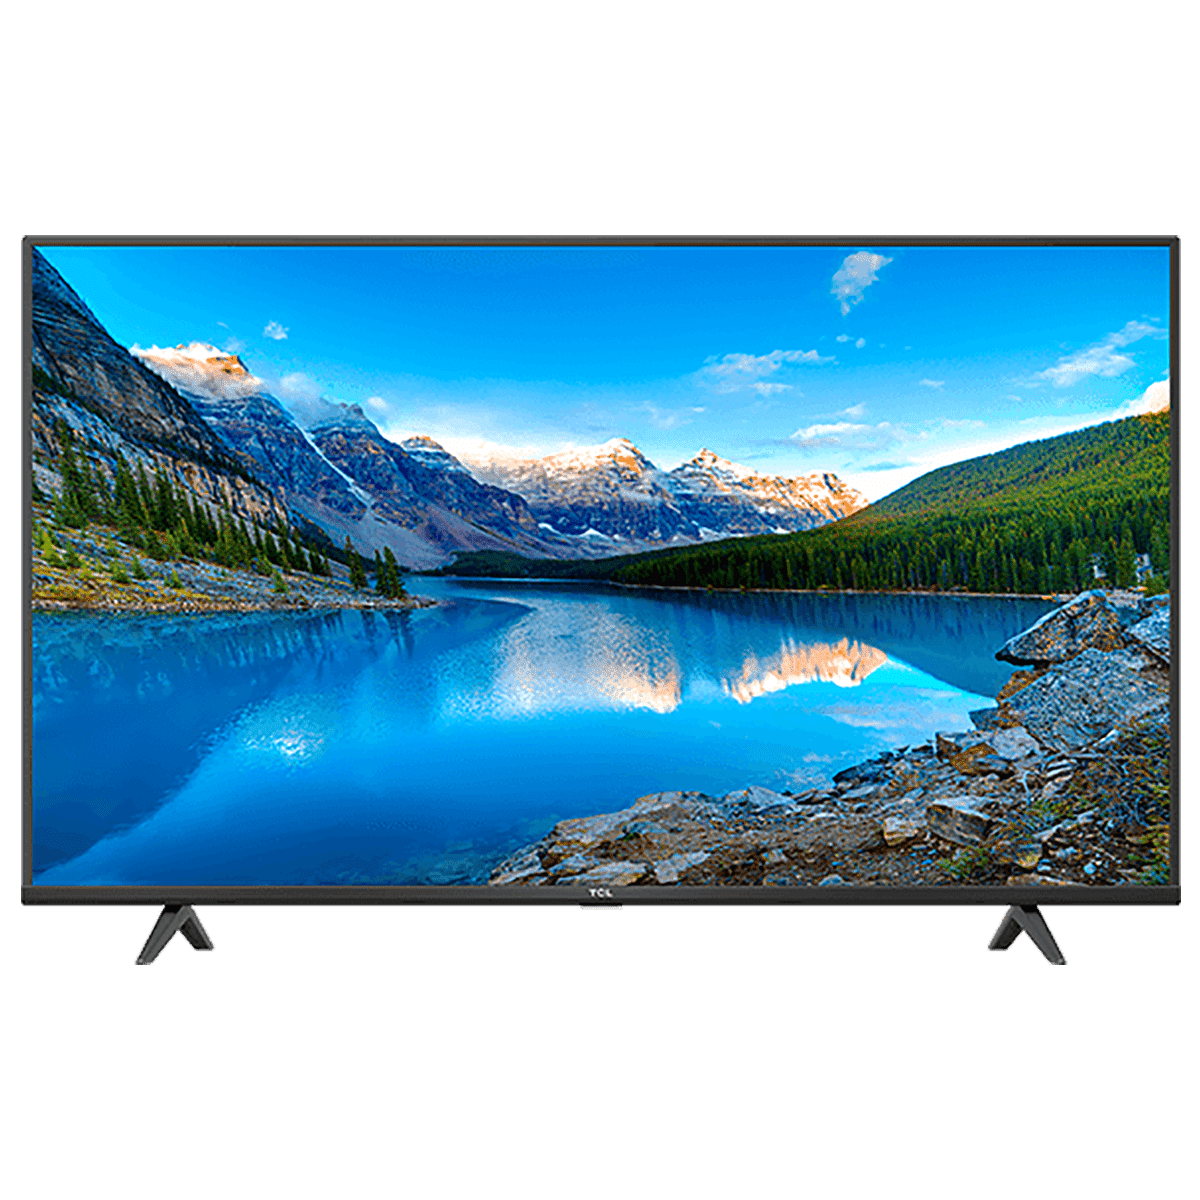 Buy TCL P615 108cm (43 Inch) 4K Ultra HD LED Android Smart TV (Hands-Free Voice Control, 43P615, Black)